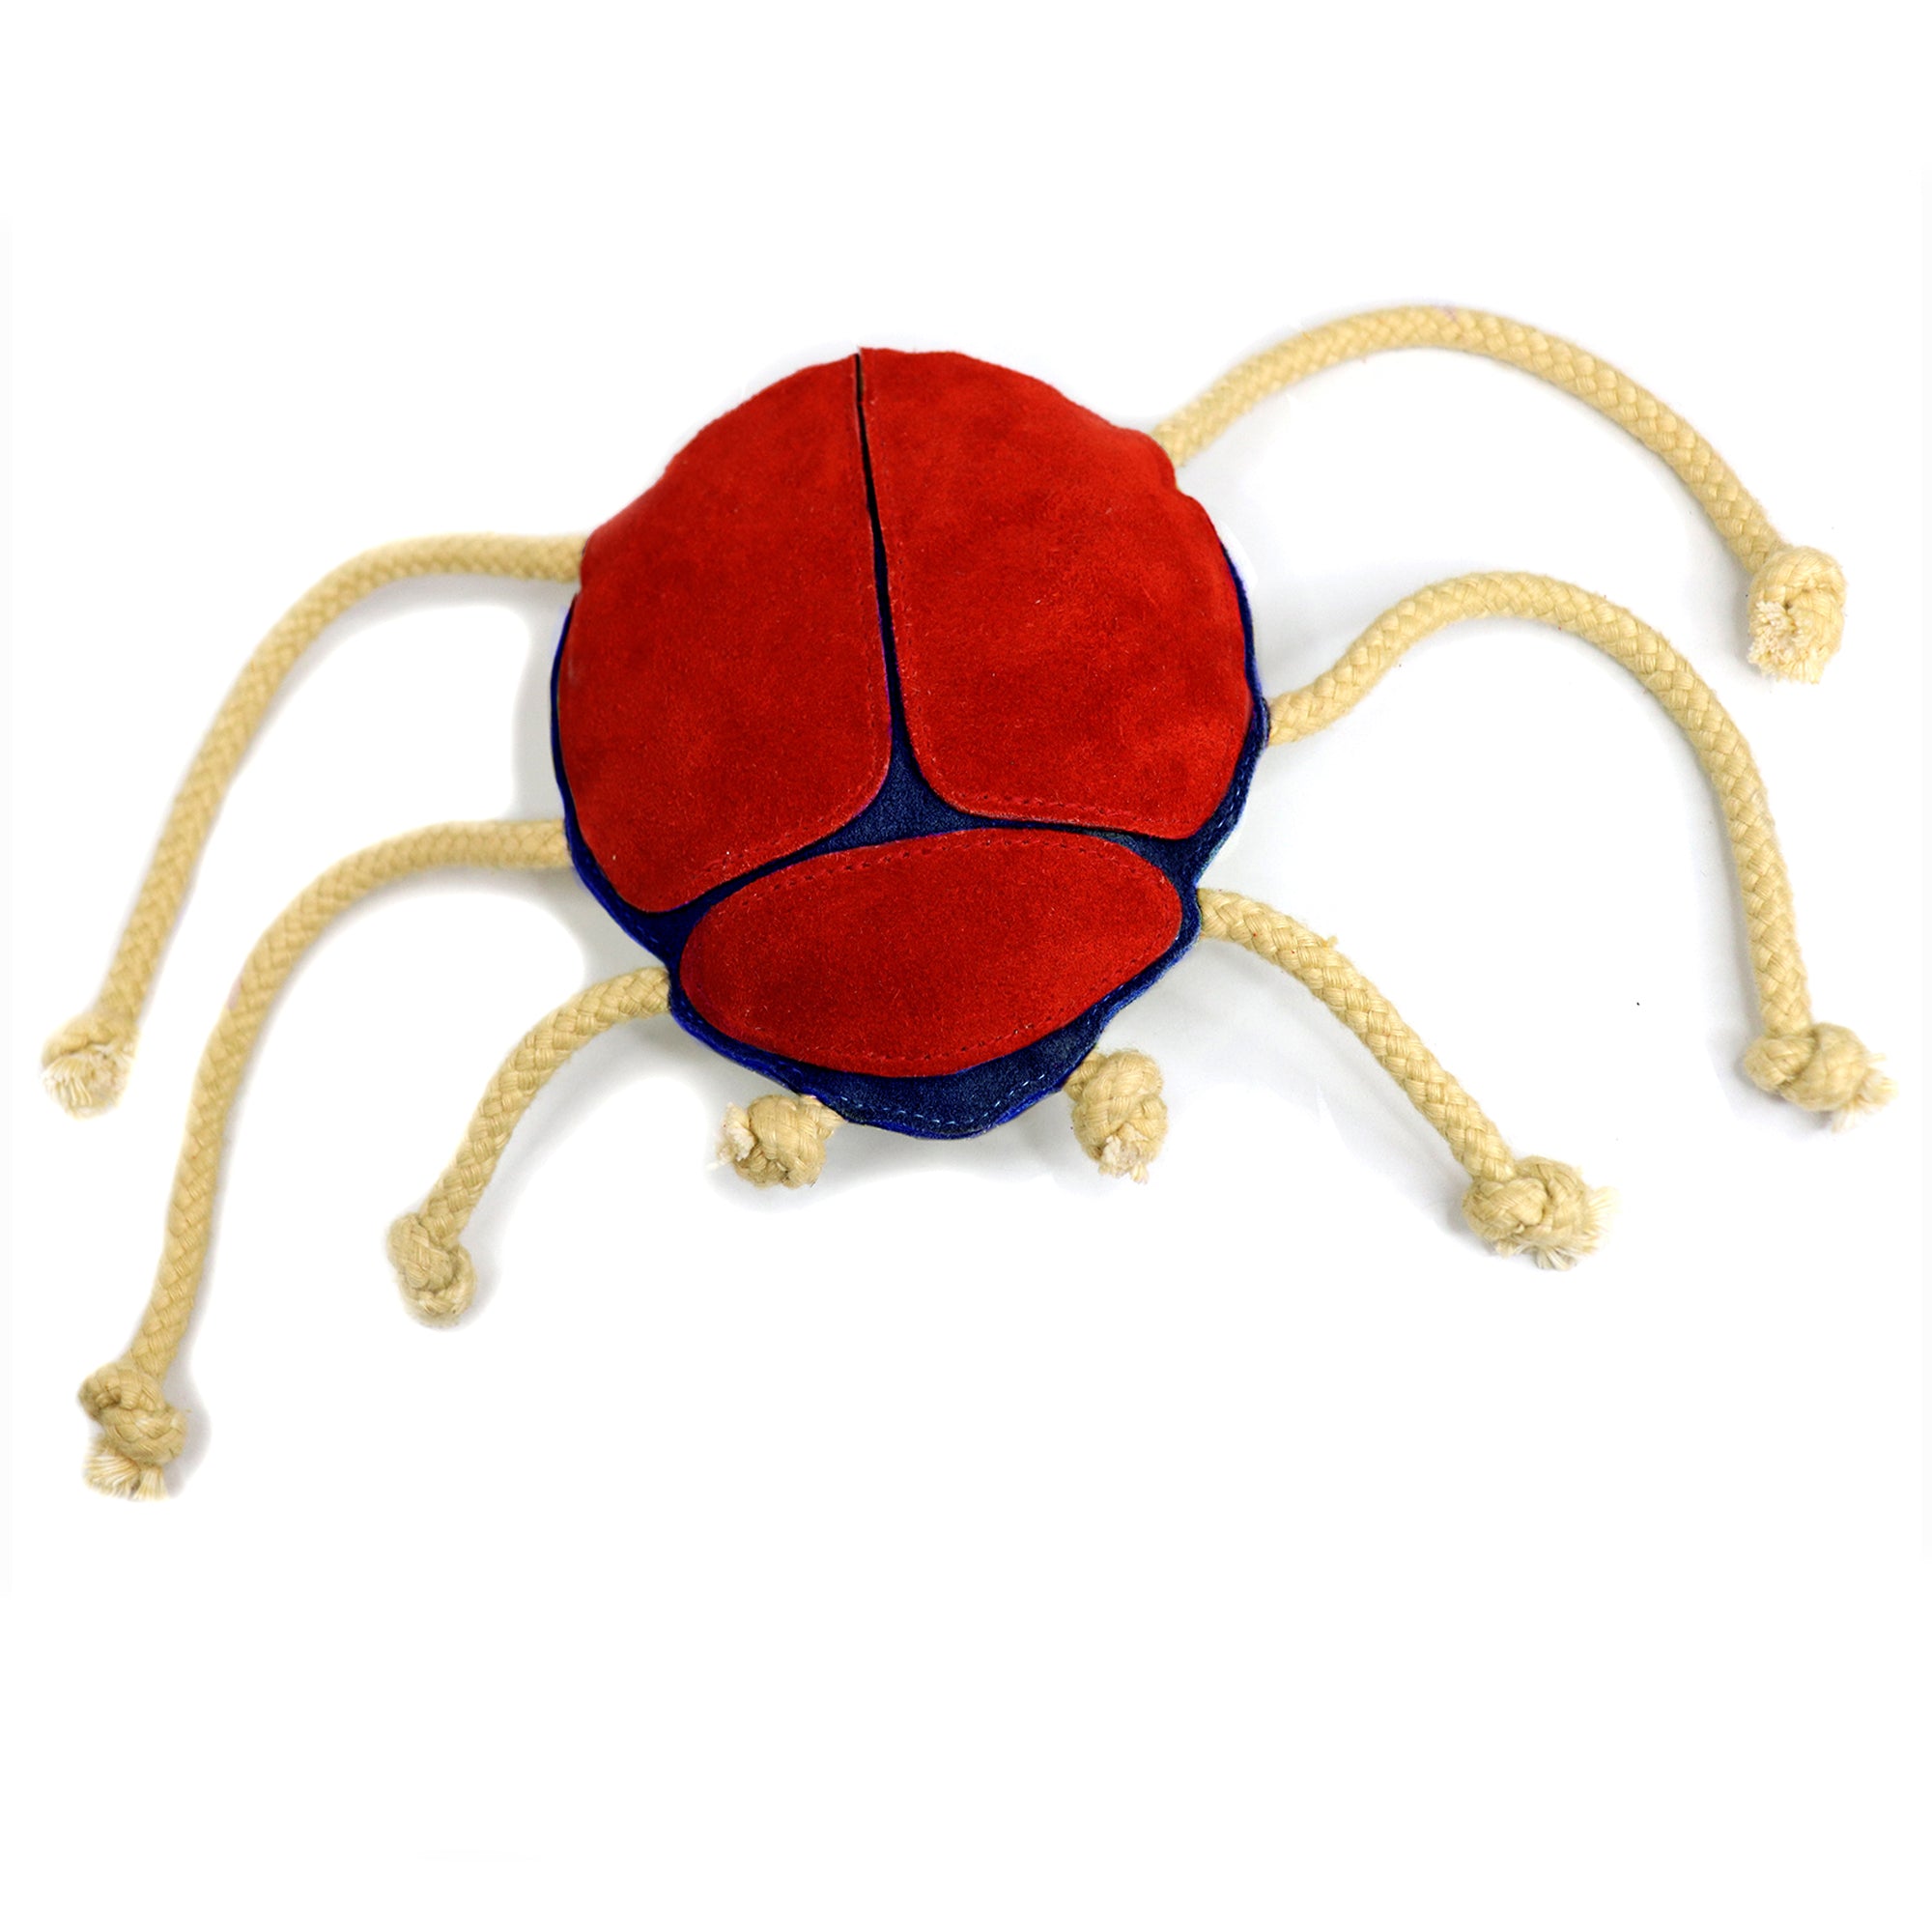 A Betty Beetle Chew Toy - red + navy designed by Georgie Paws is a plush toy that simulates a whimsical, colorful insect. It features six light tan rope legs, each ending in a knot, against a white background.